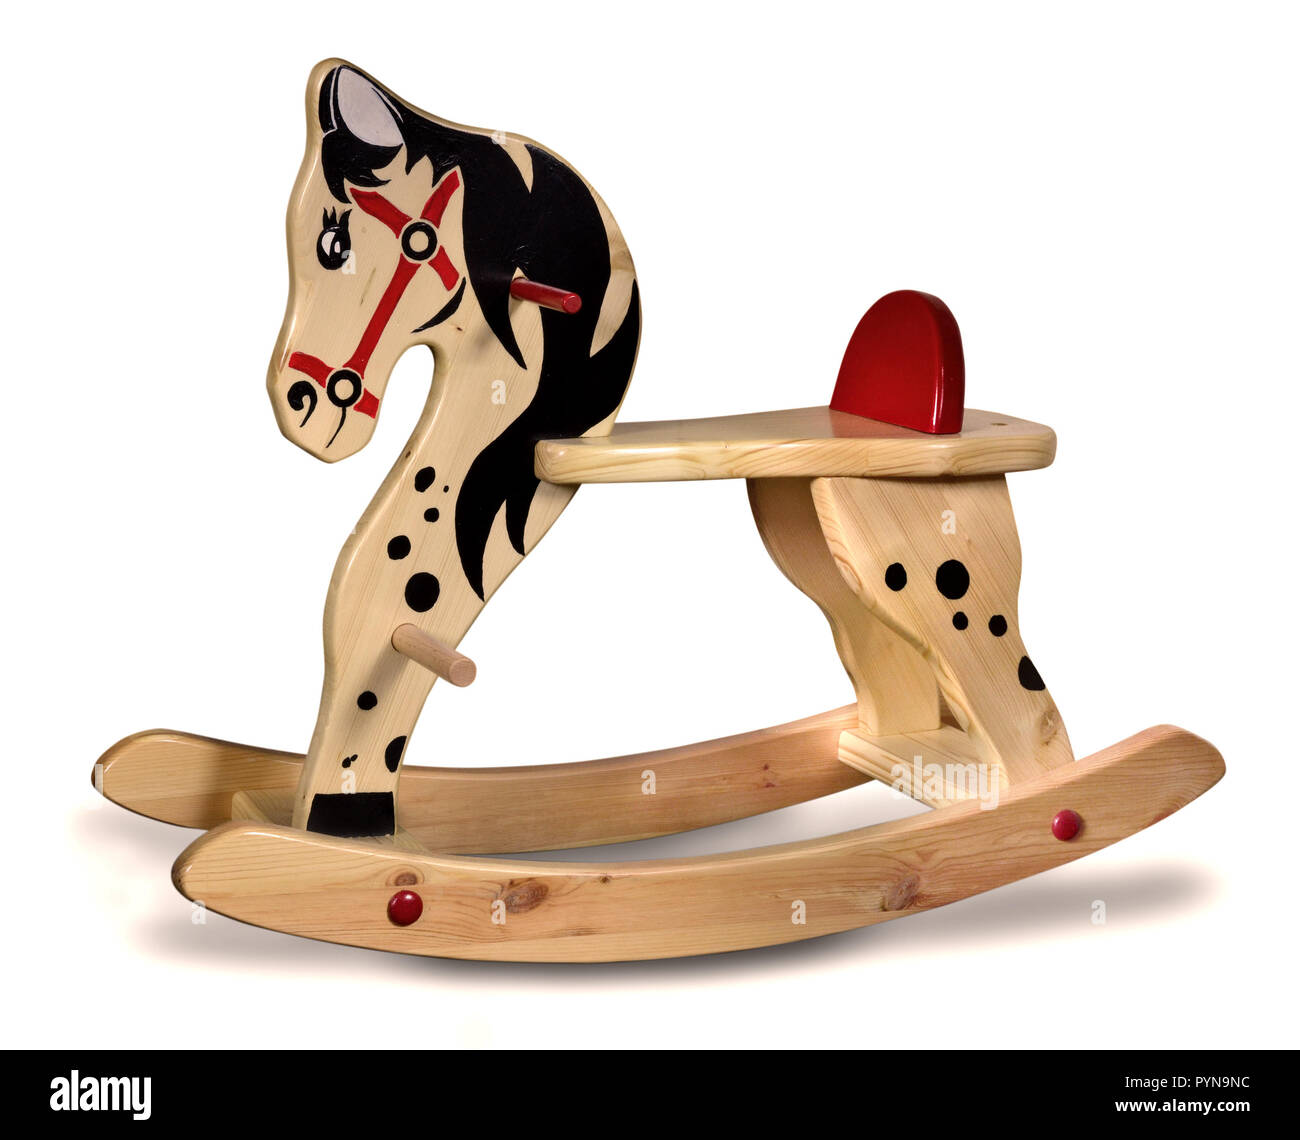 rocking horse seesaw toy wood wooden hotteh Stock Photo